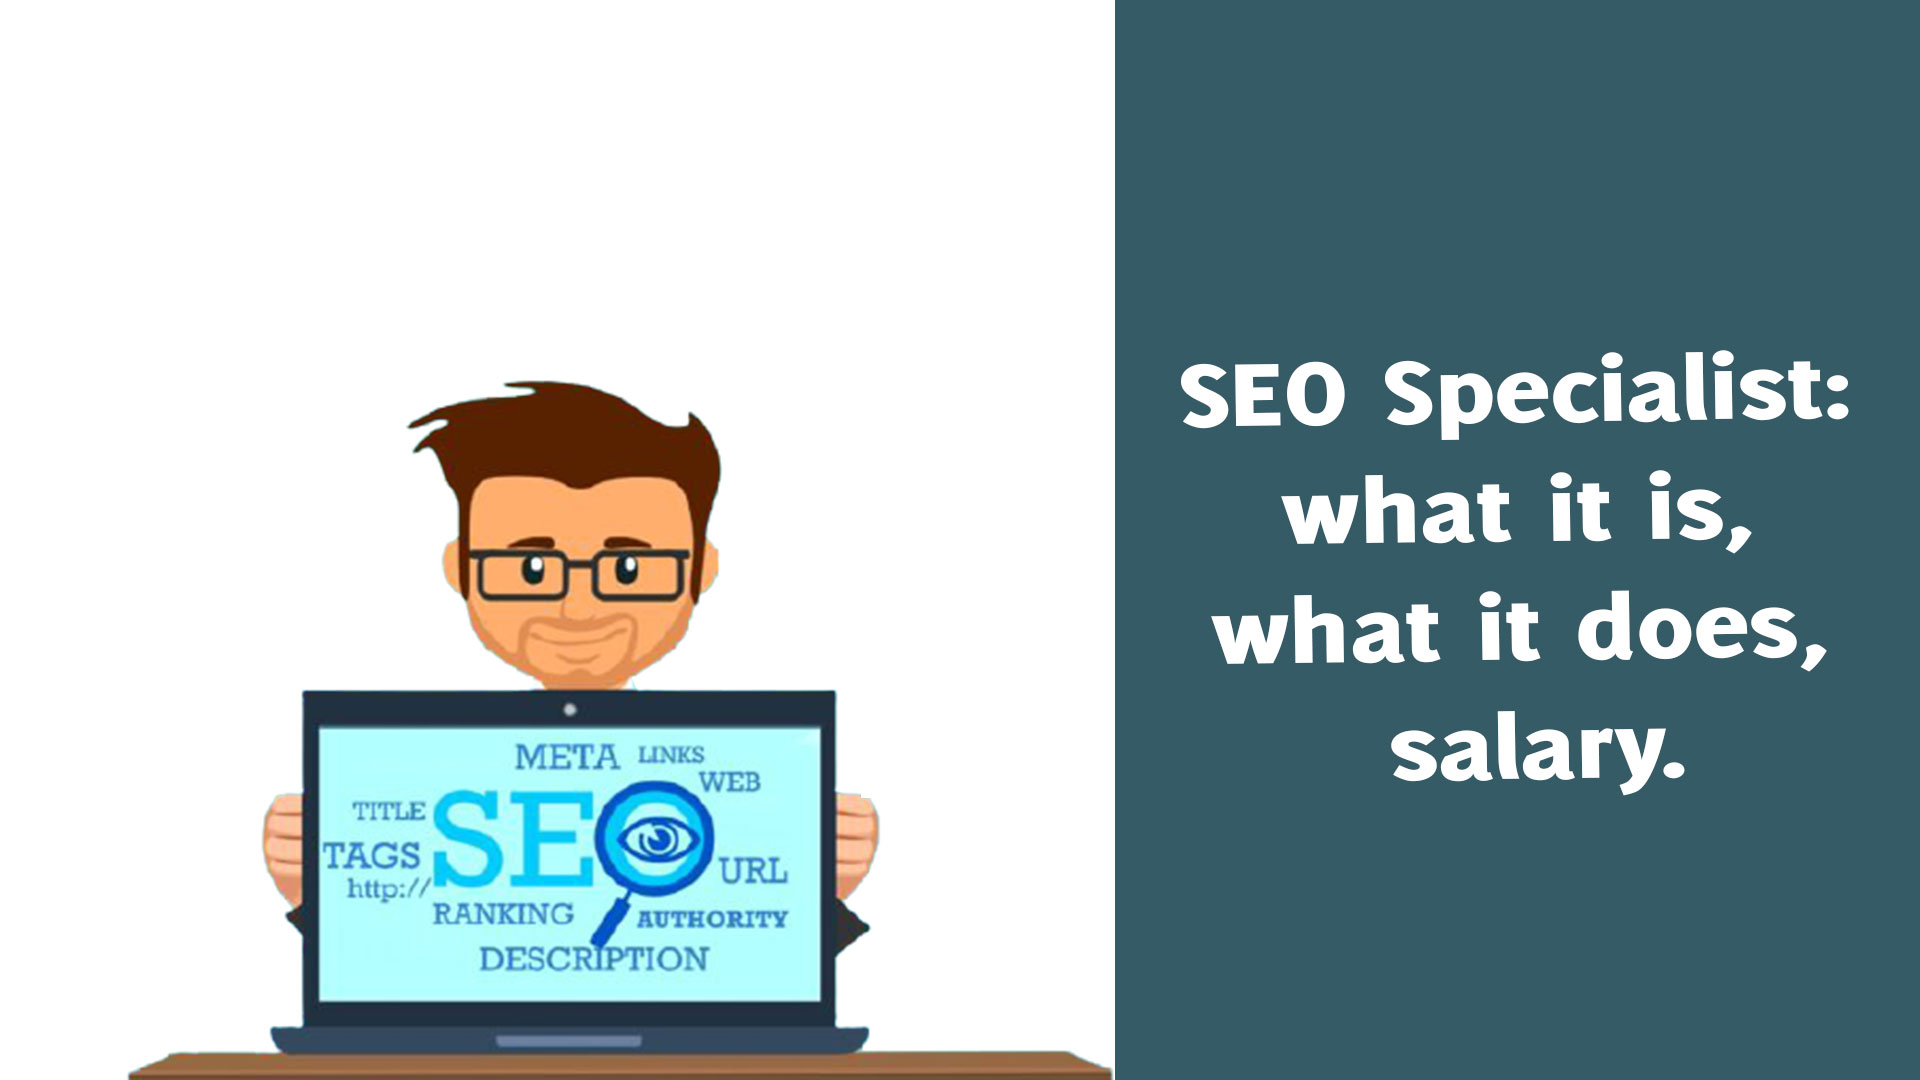 SEO Specialist: what it is, what it does, salary.